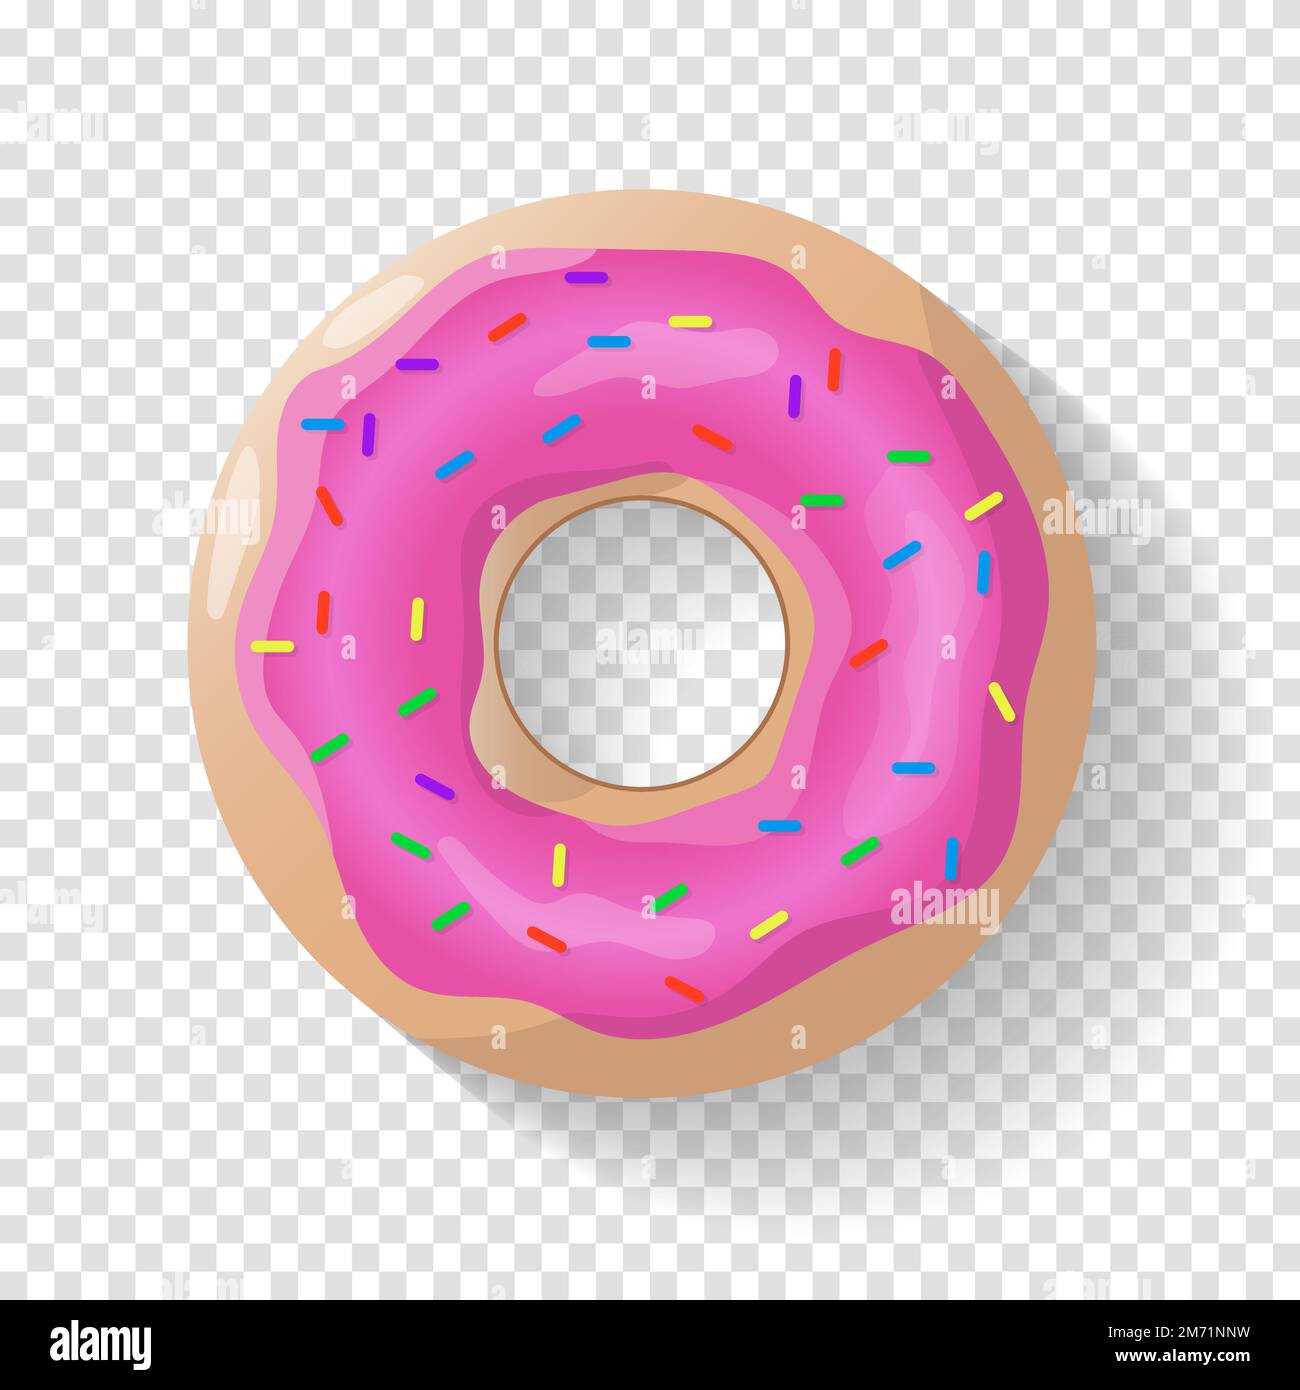 Donut Isolated Background Cute Pink Donut Colorful And Glossy Donut With Pink Glaze And 9975